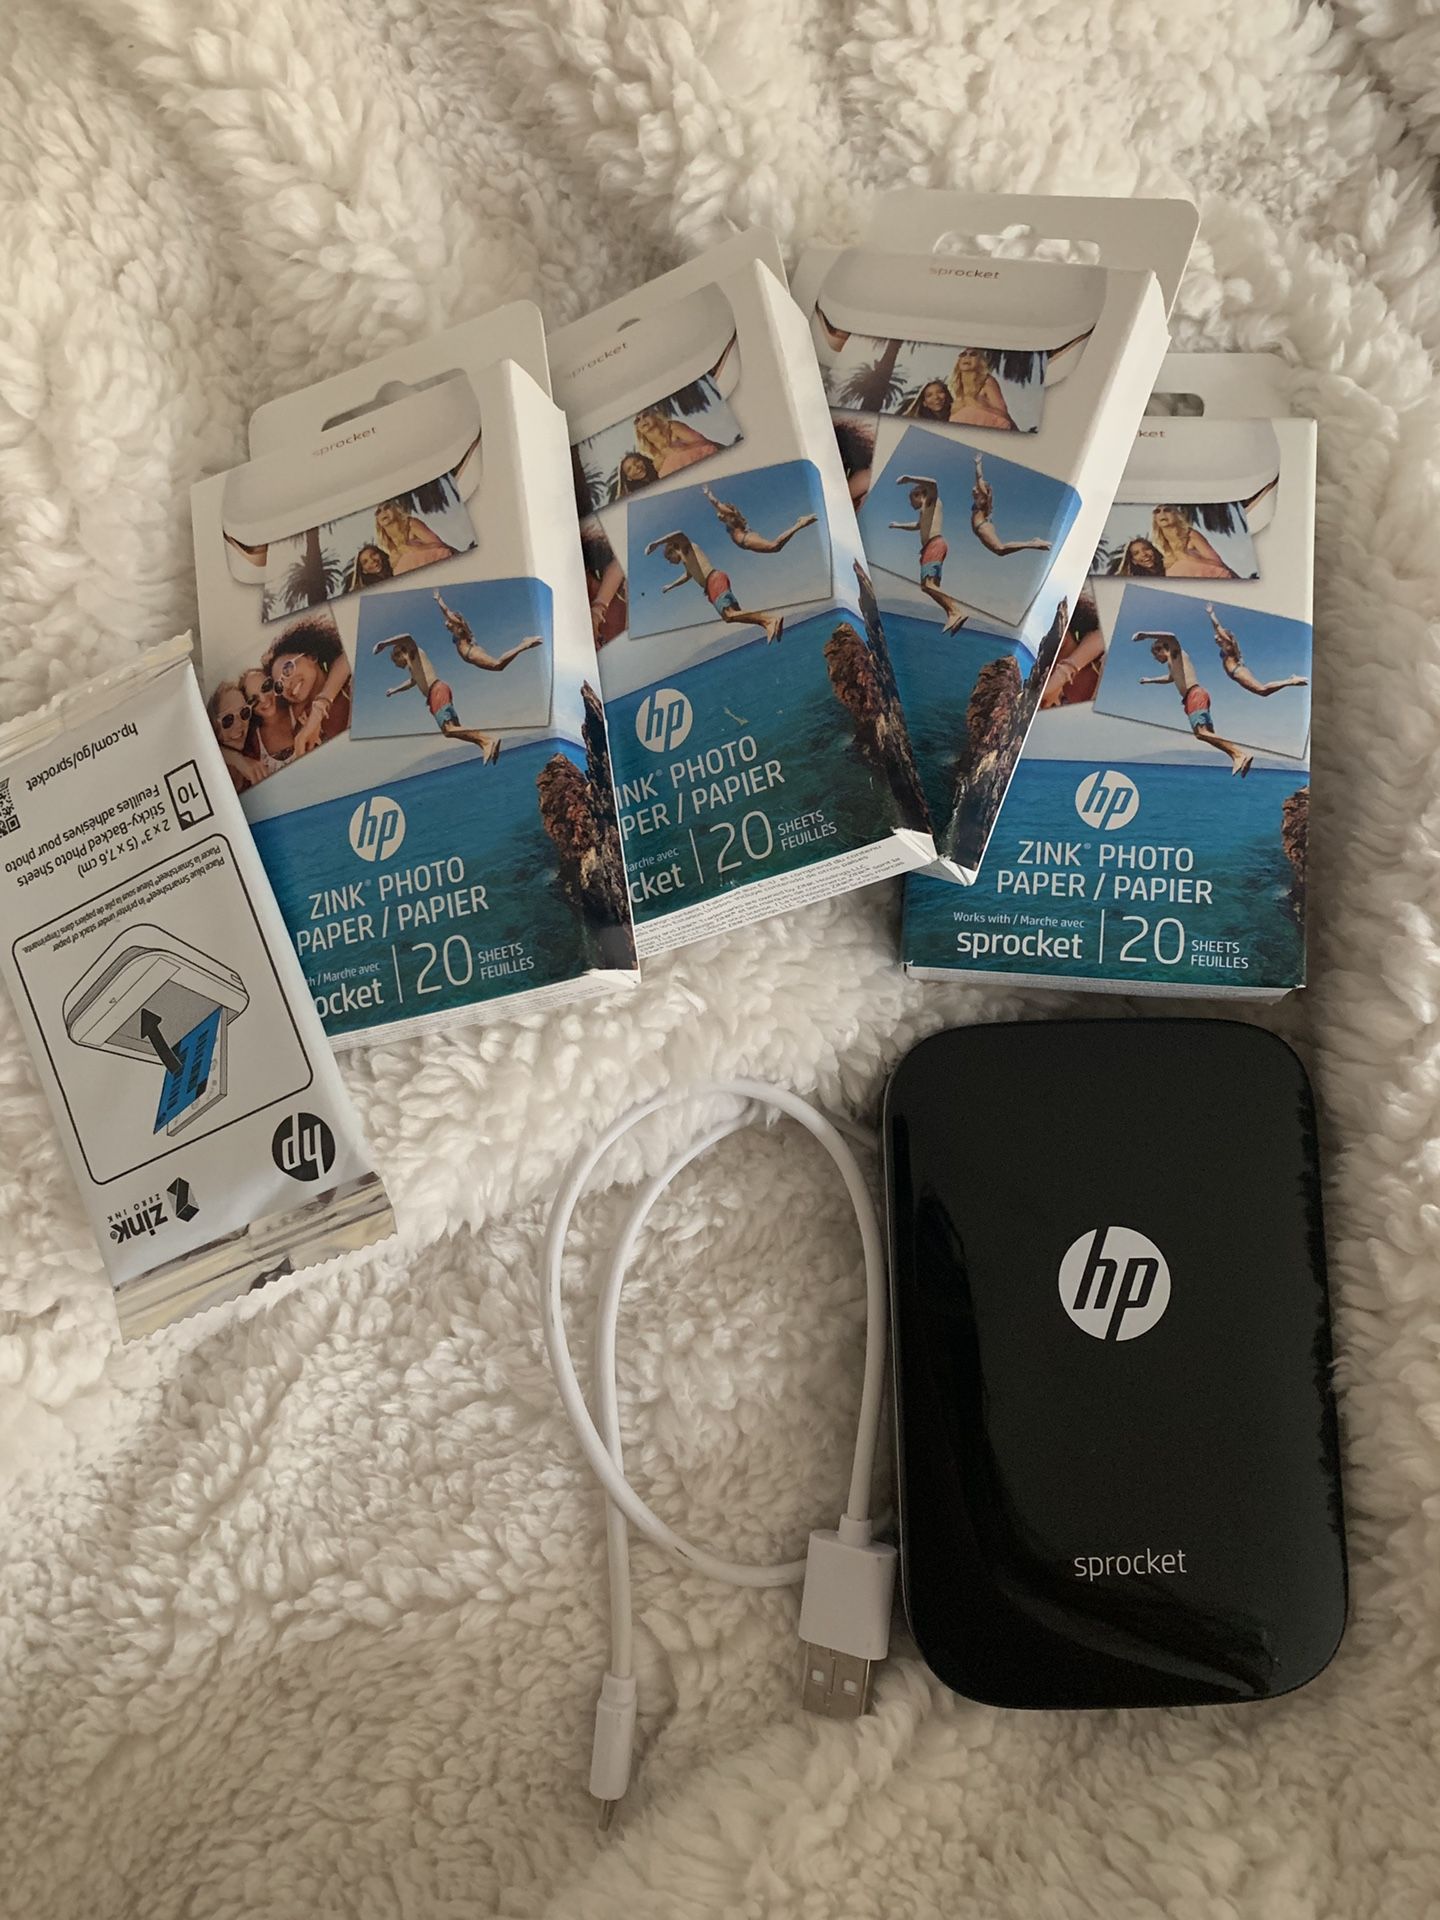 hp sprocket with photo paper. 81 sheets & charger included